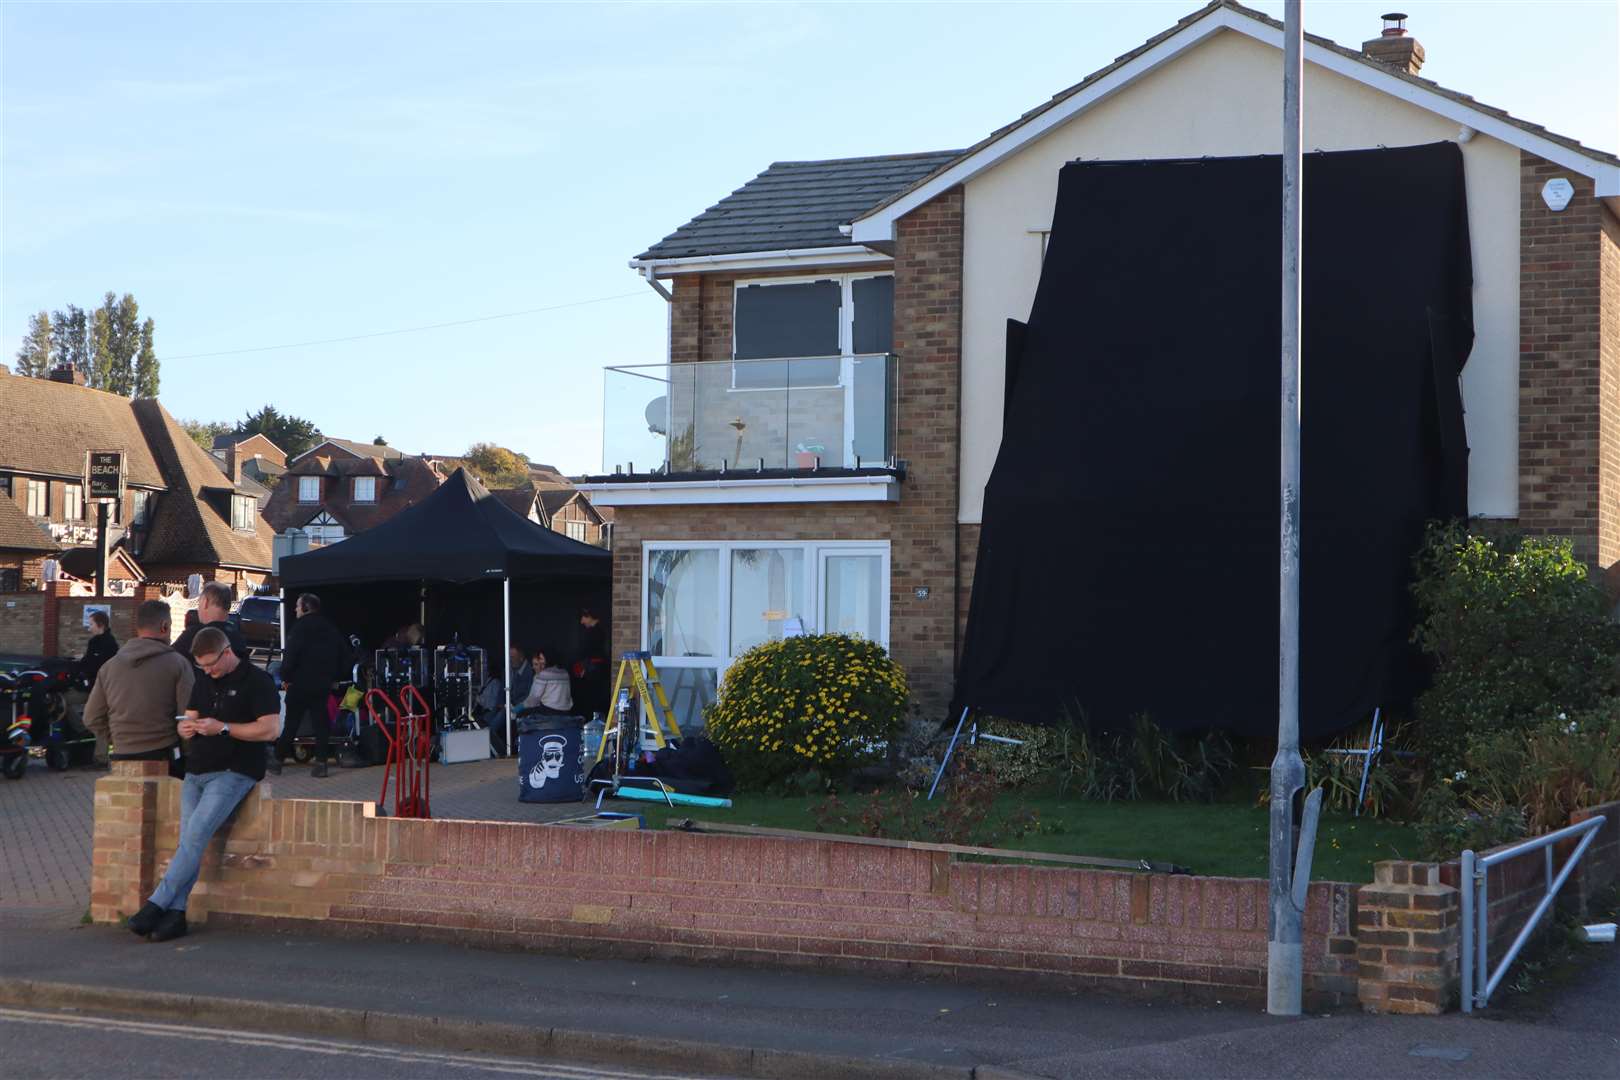 This house on The Leas at Minster is featured in the new series of the BBC drama Silent Witness